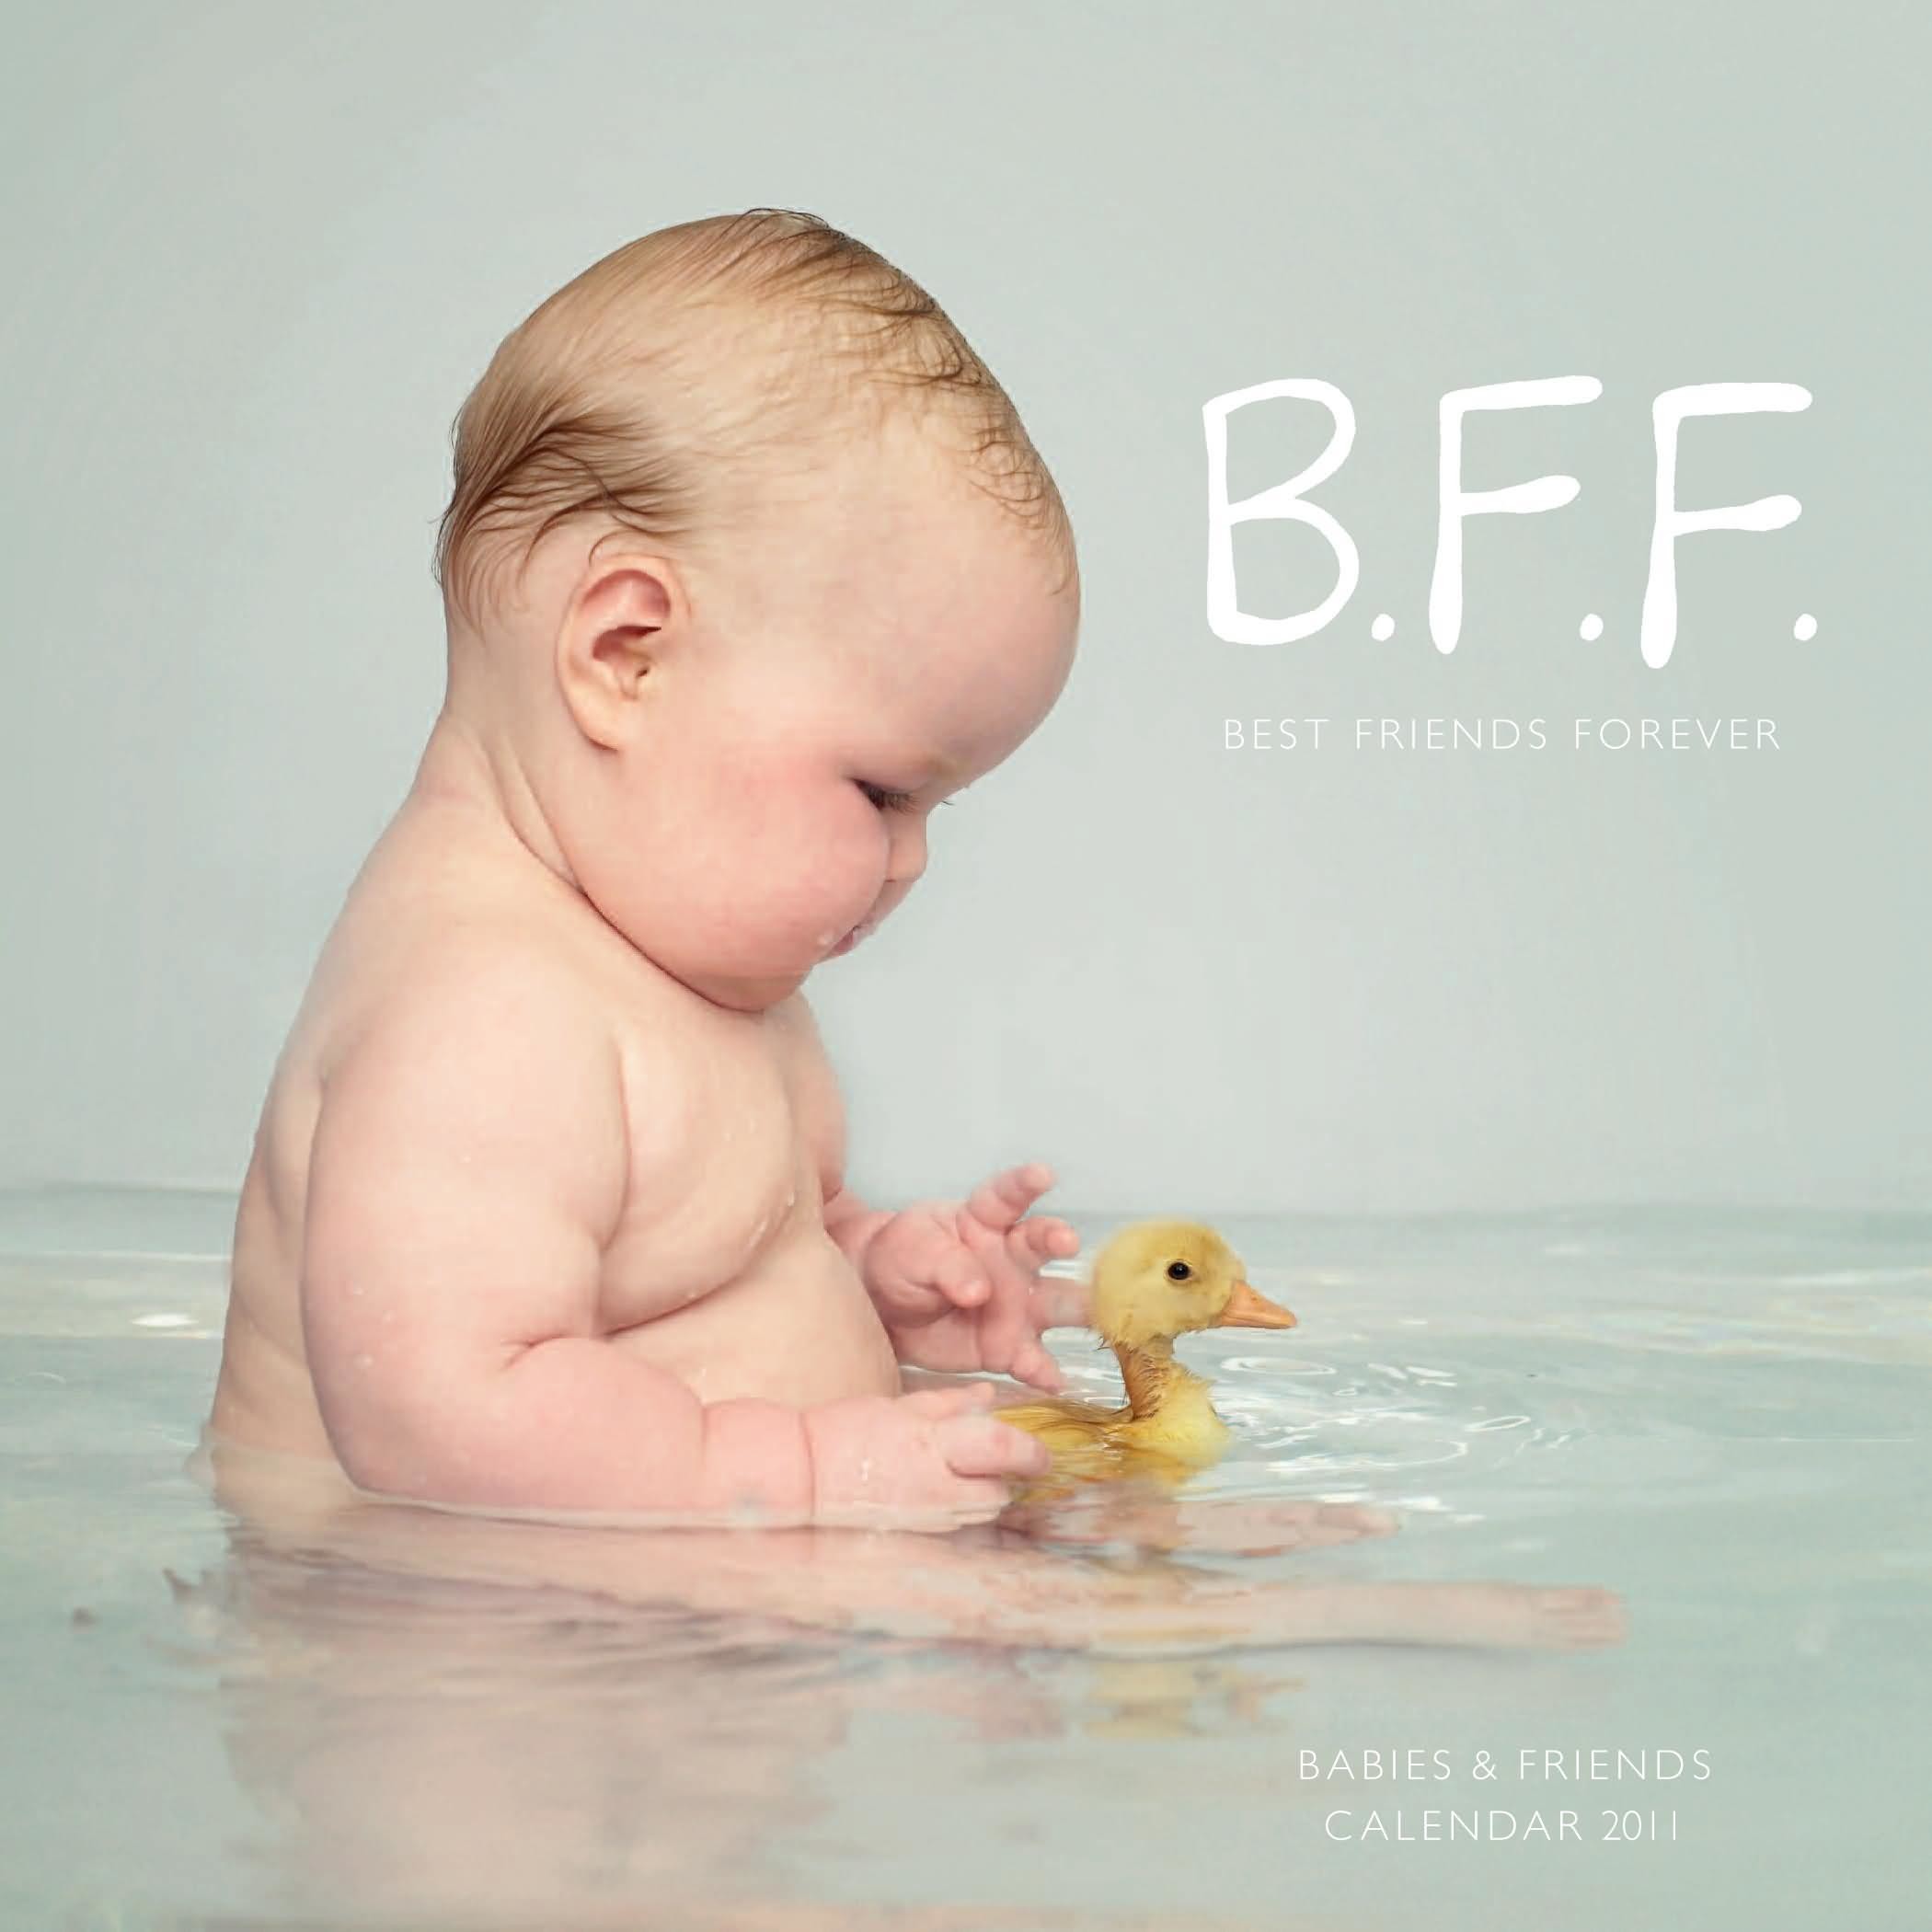 My friends baby. Friend Baby. Friends for Baby. Friendship Babies. Frend_Baby inst.